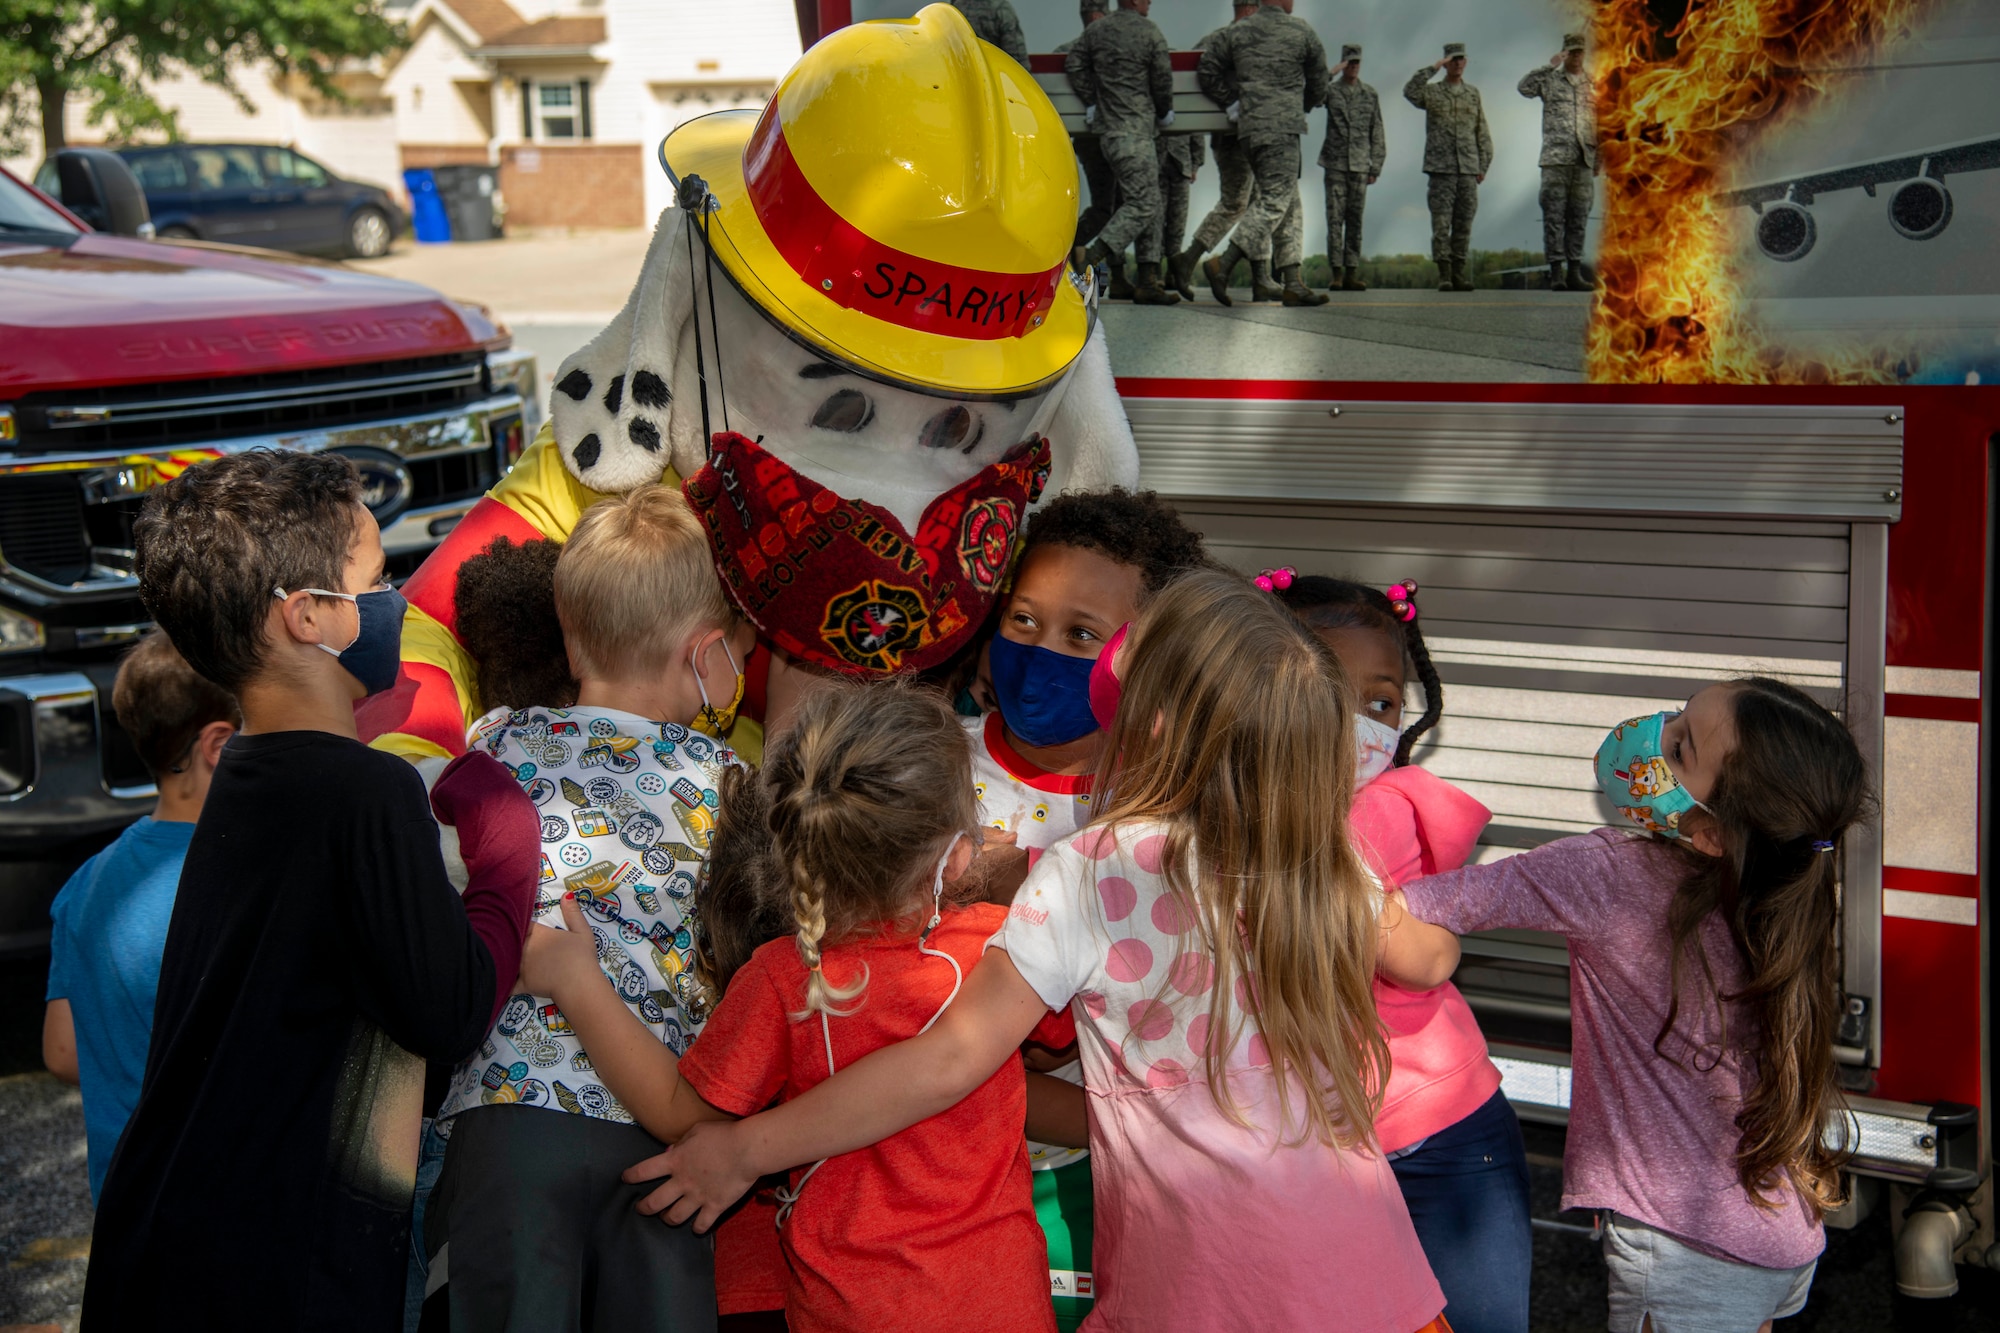 Students from Major George S. Welch Elementary School give Sparky the Fire Dog a hug after learning about fire safety during a visit for Fire Prevention Week on Dover Air Force Base, Delaware, Oct. 15, 2021. Fire Prevention Week is an annual observance to educate the Dover AFB community about the importance of fire prevention. (U.S. Air Force photo by Tech. Sgt. Nicole Leidholm)